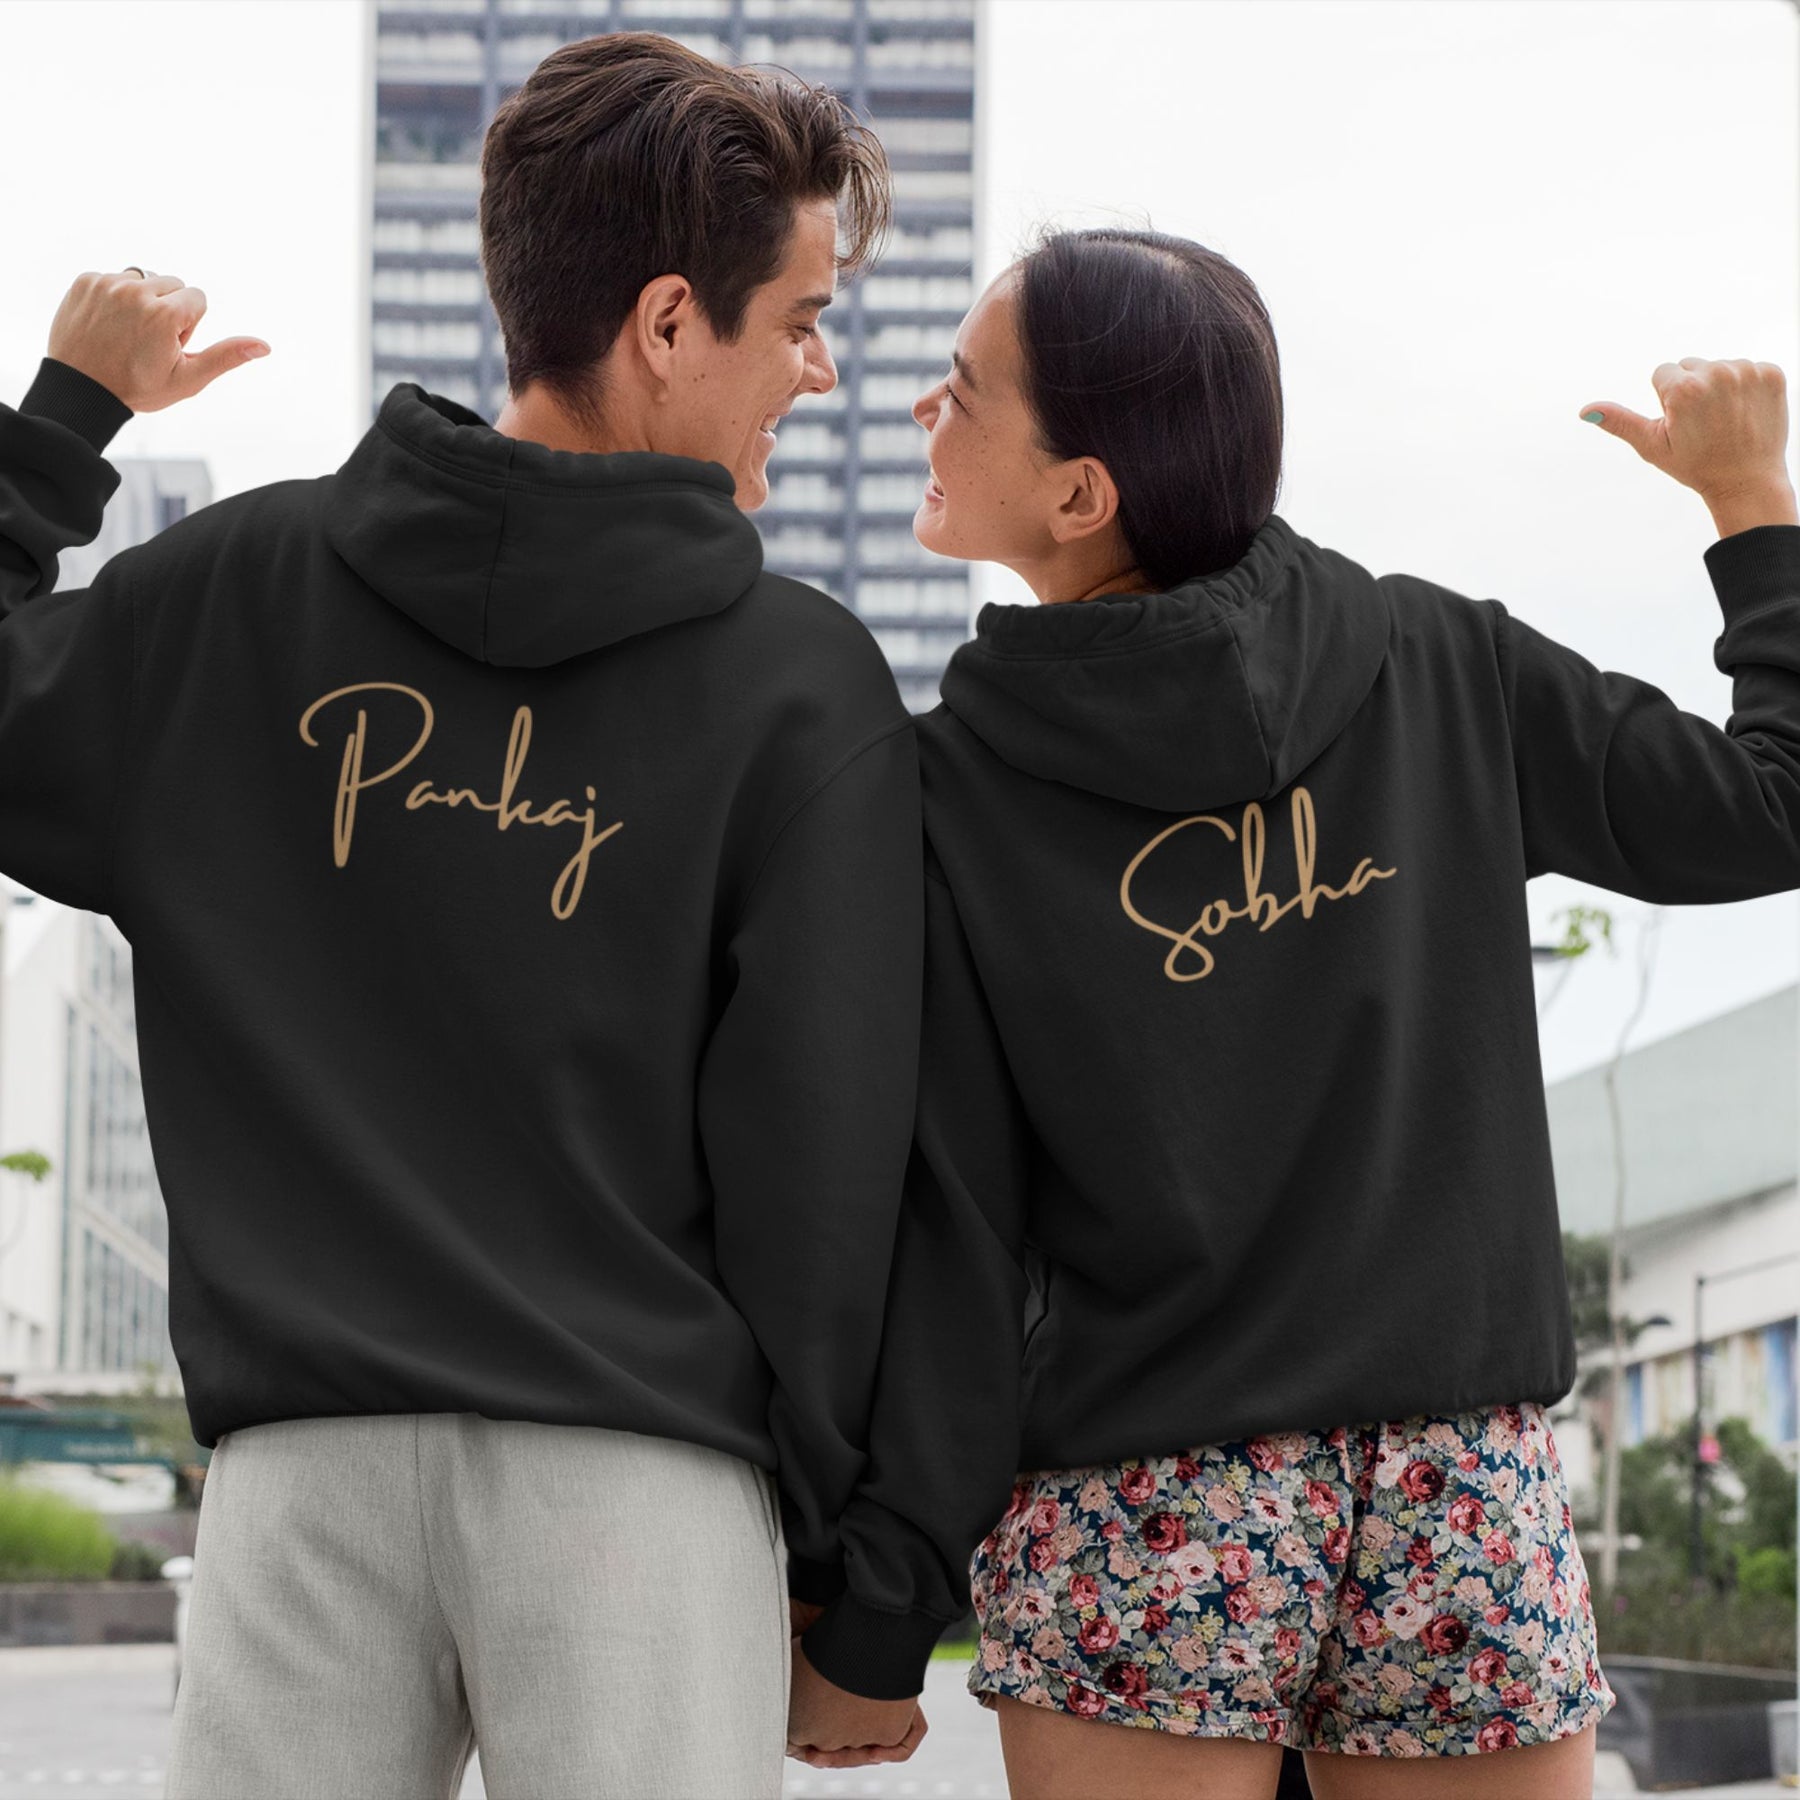 Print names on back of your couple hoodies